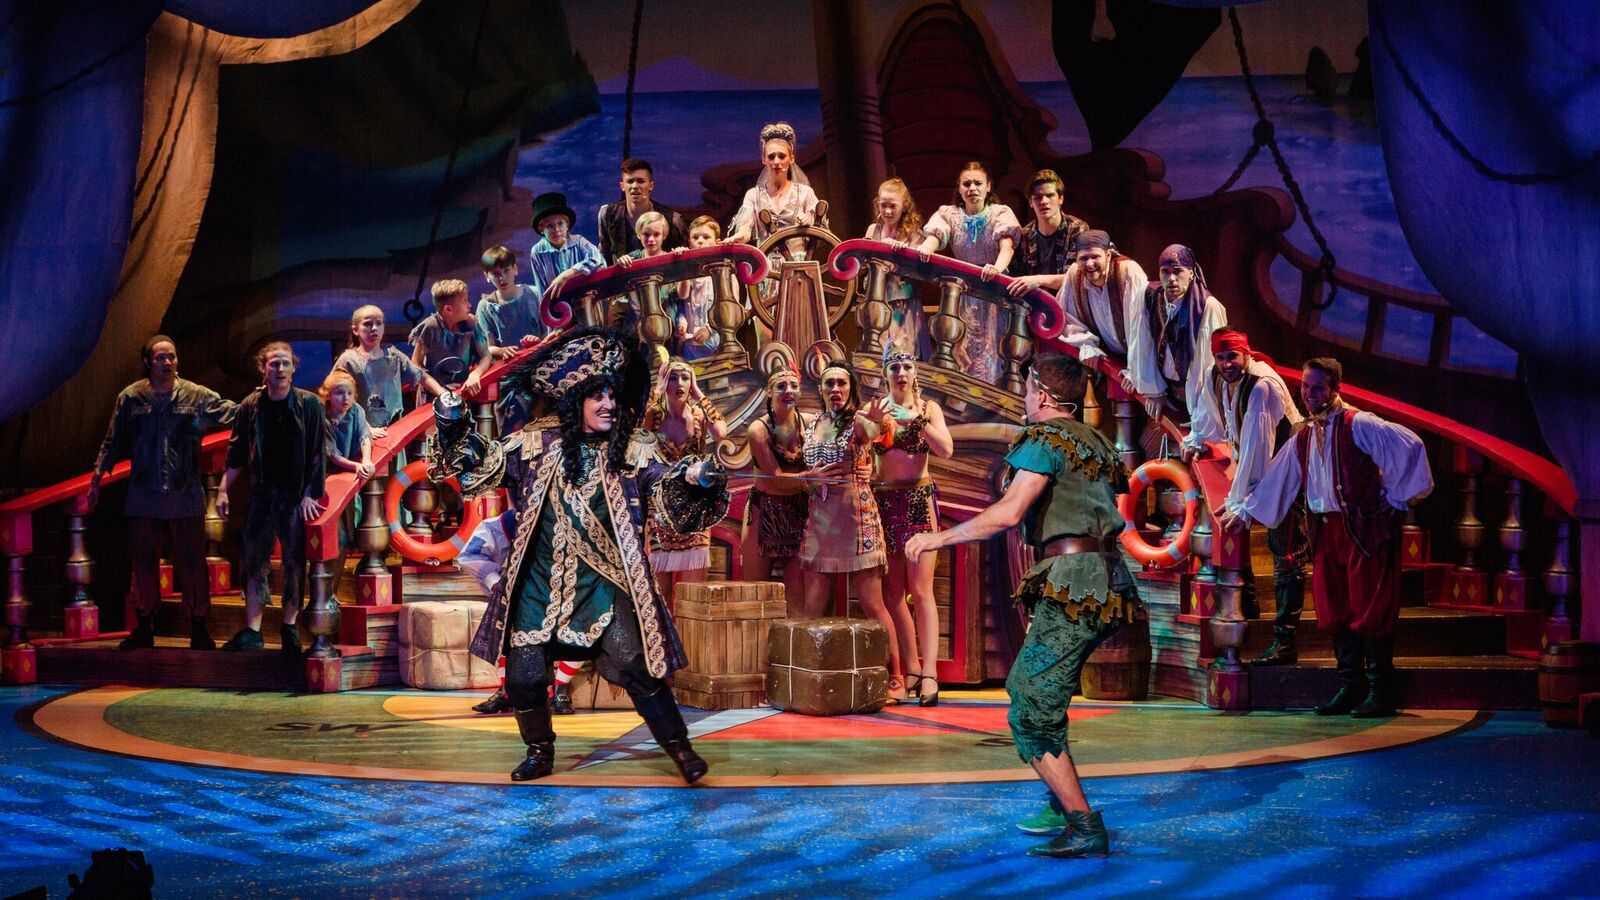 THE ADVENTURES OF PETER PAN & TINKERBELL IN RETURN TO PANTOLAND